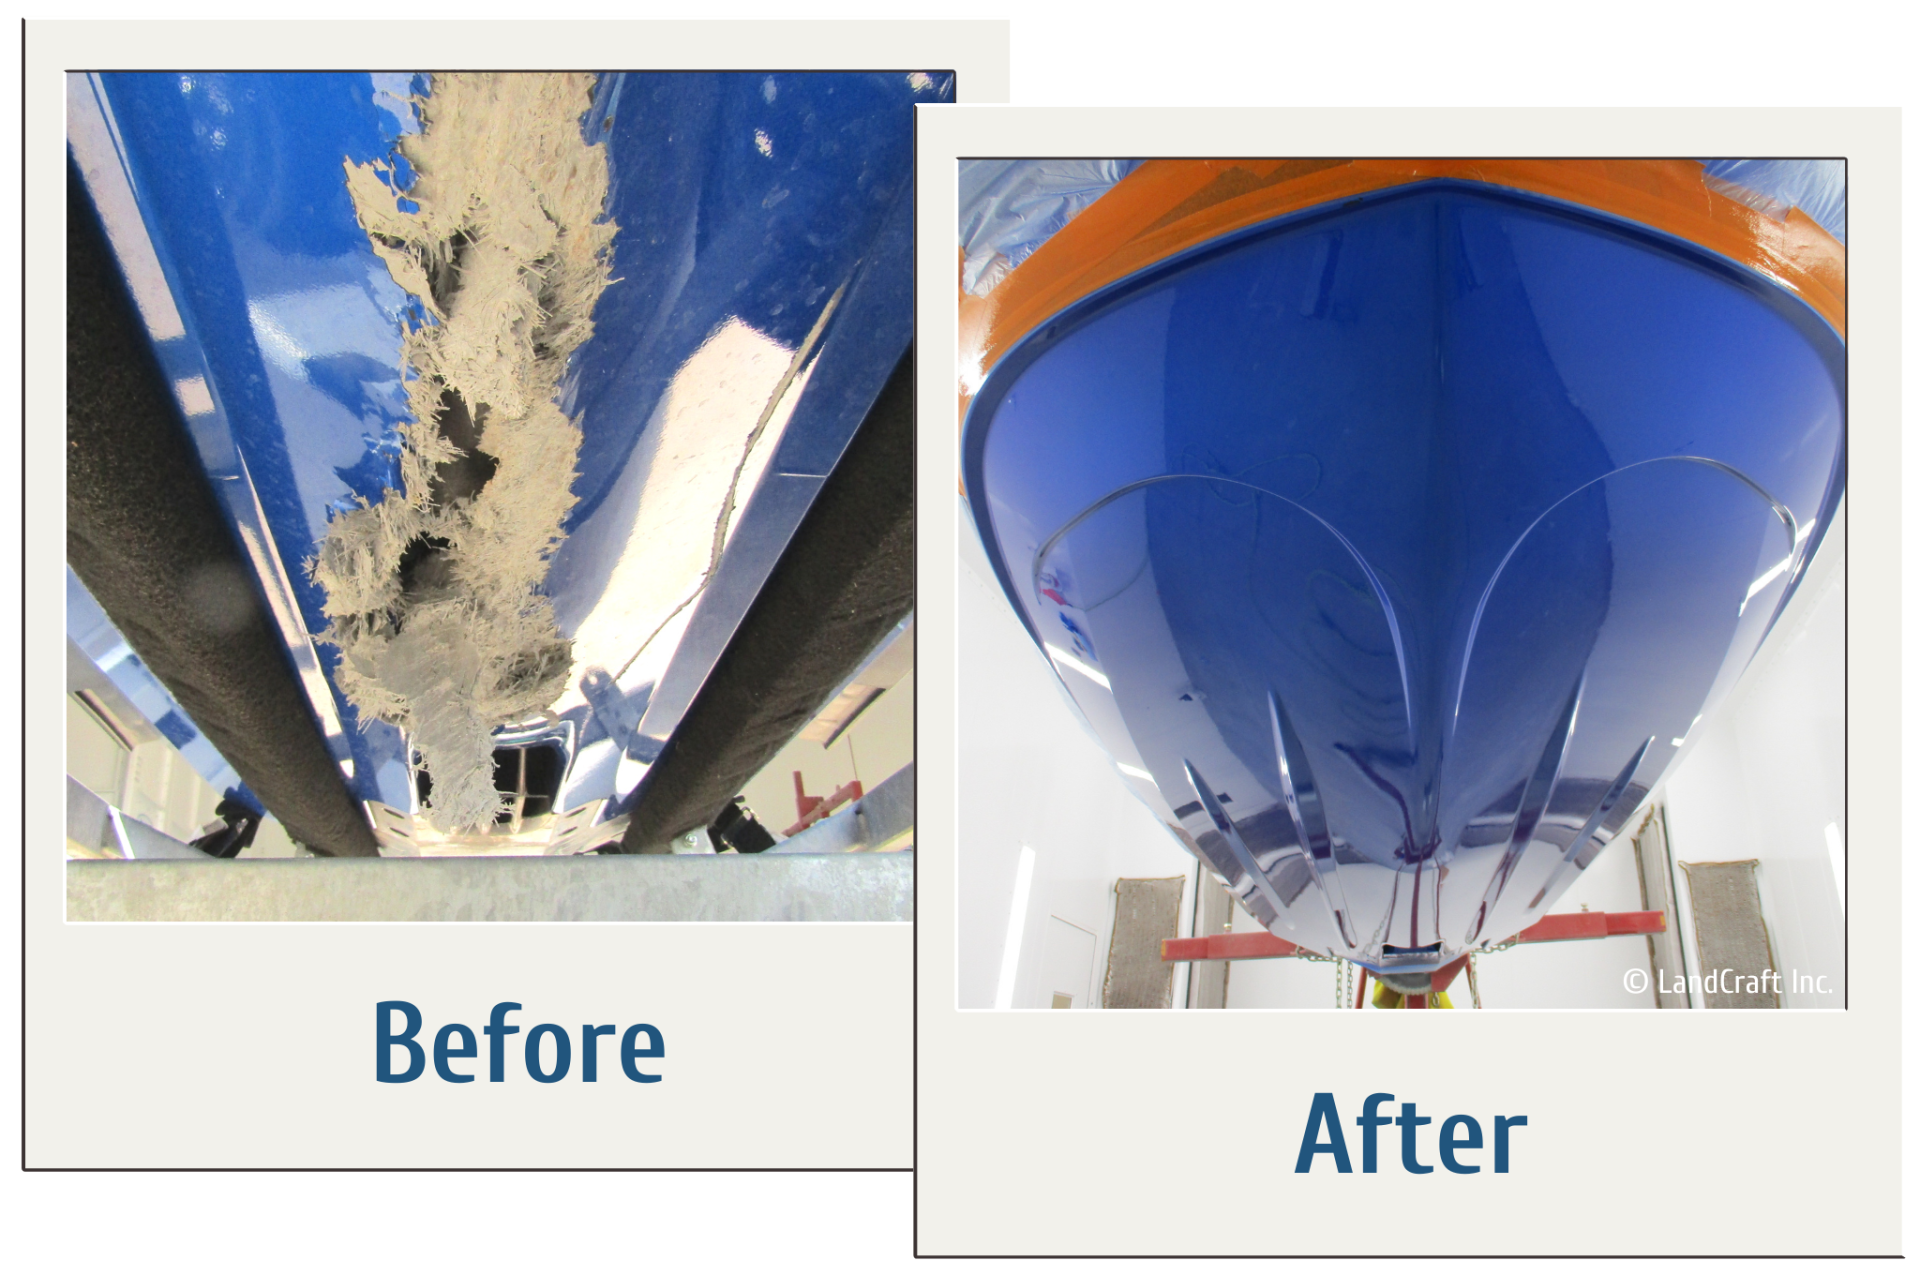 Before and after of a major structural repair on a waverunner